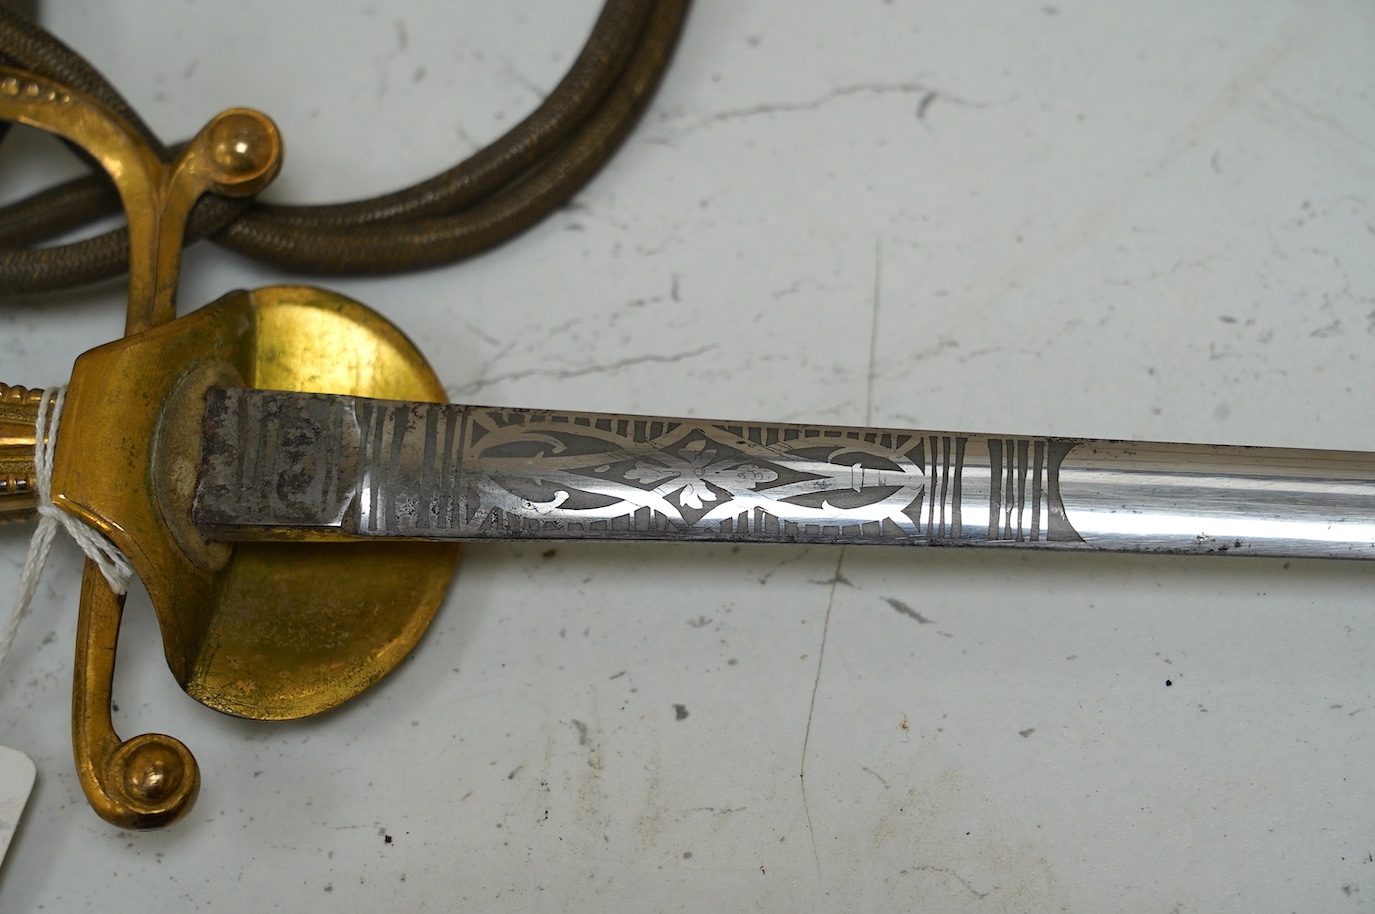 A late Victorian court sword gilt brass hilt with crown on guard, beaded edges, bullion dress knots, in its leather scabbard, blade 78cm. Condition - fair to good